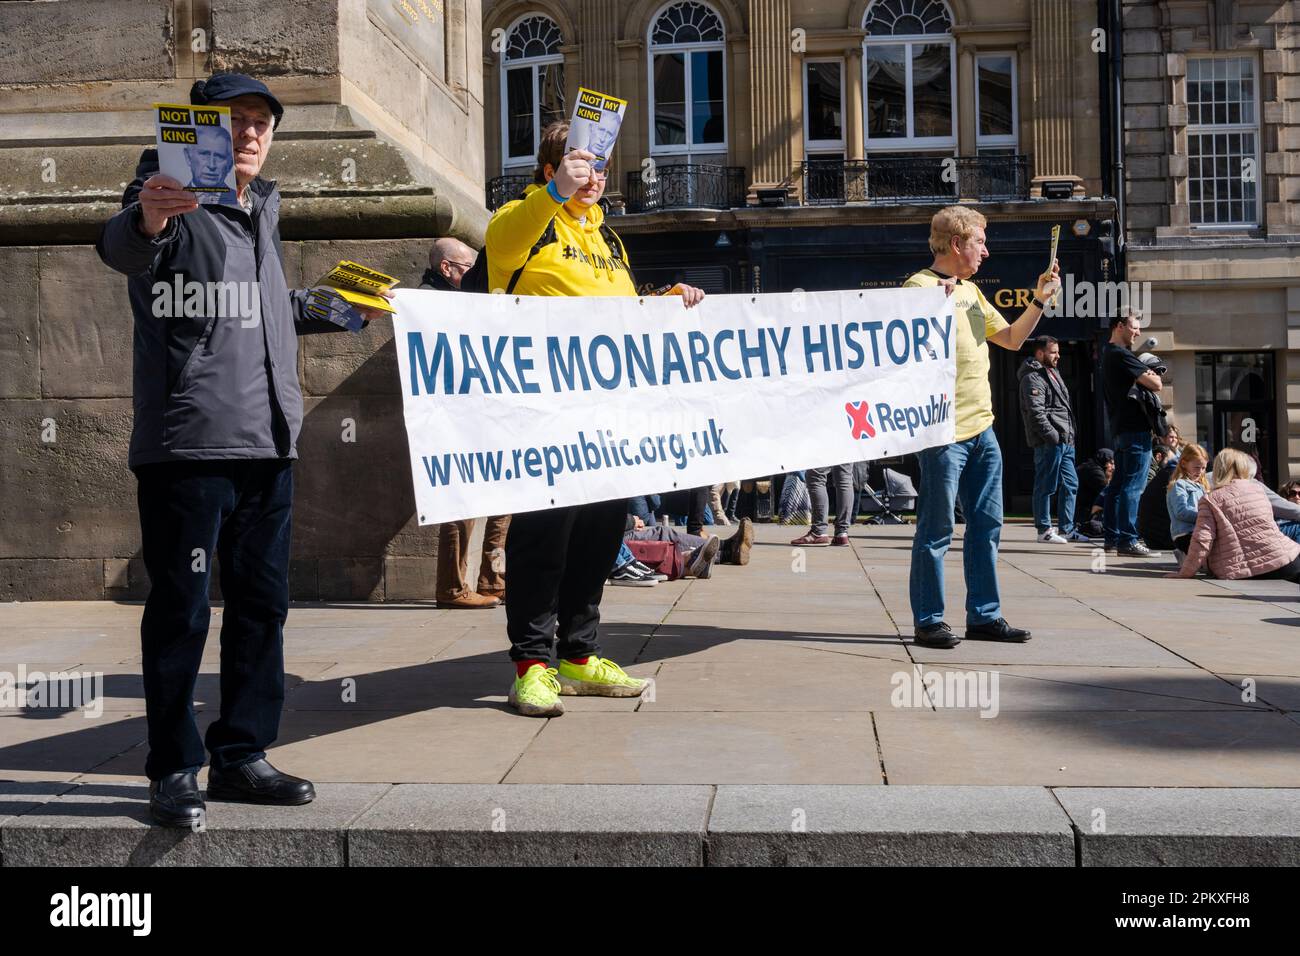 Demonstrators hold a sign saying 'Make Monarchy History' in Newcastle upon Tyne, ahead of the King's Coronation in the UK. Stock Photo